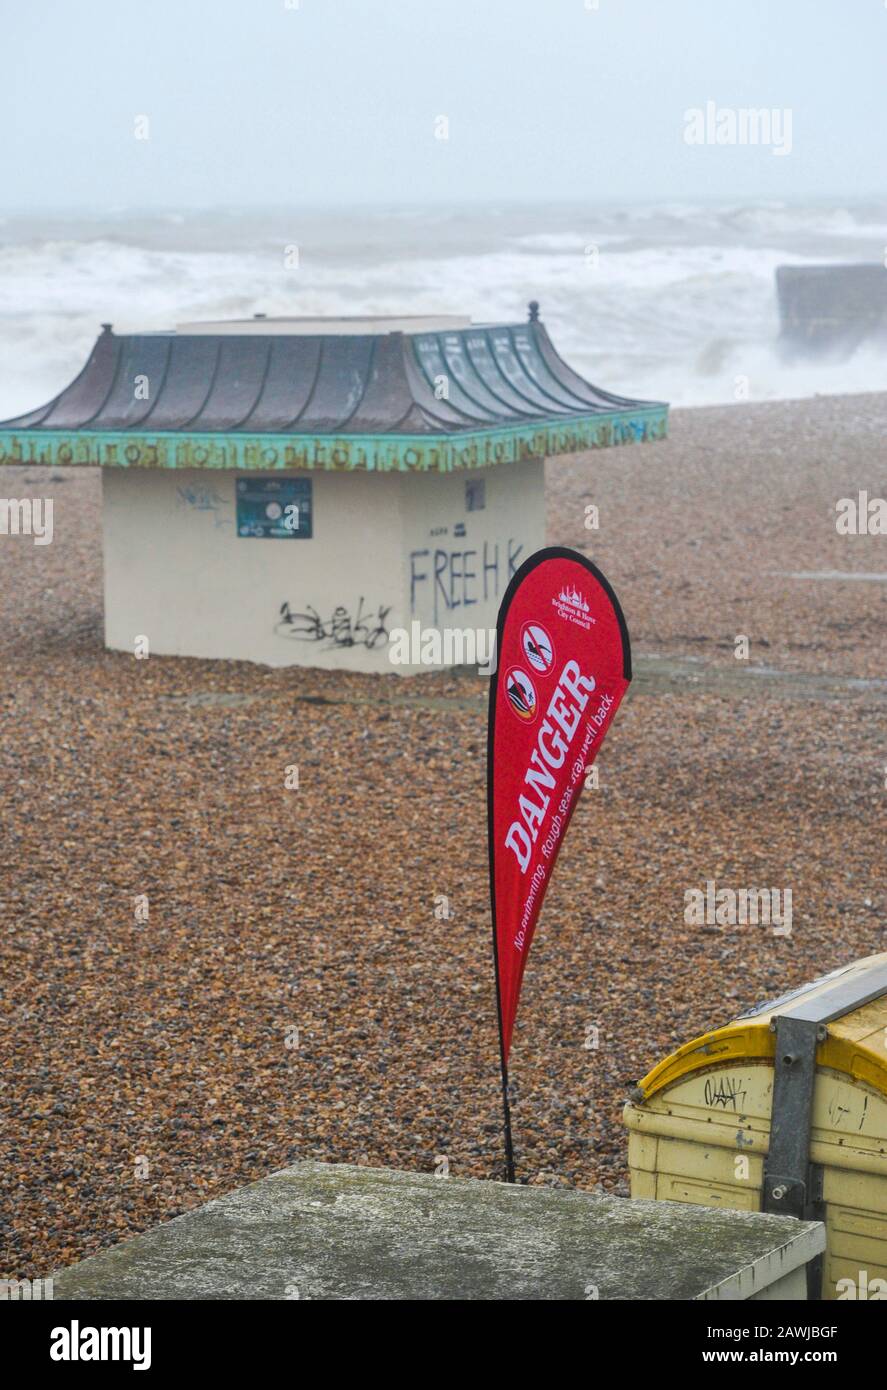 Brighton UK 9th February 2020 - A Danger sign on Brighton beach as Storm Ciara hits Britain with amber warnings being given throughout the country as high winds are expected to cause damage and possible danger to life: Credit Simon Dack / Alamy Live News Stock Photo